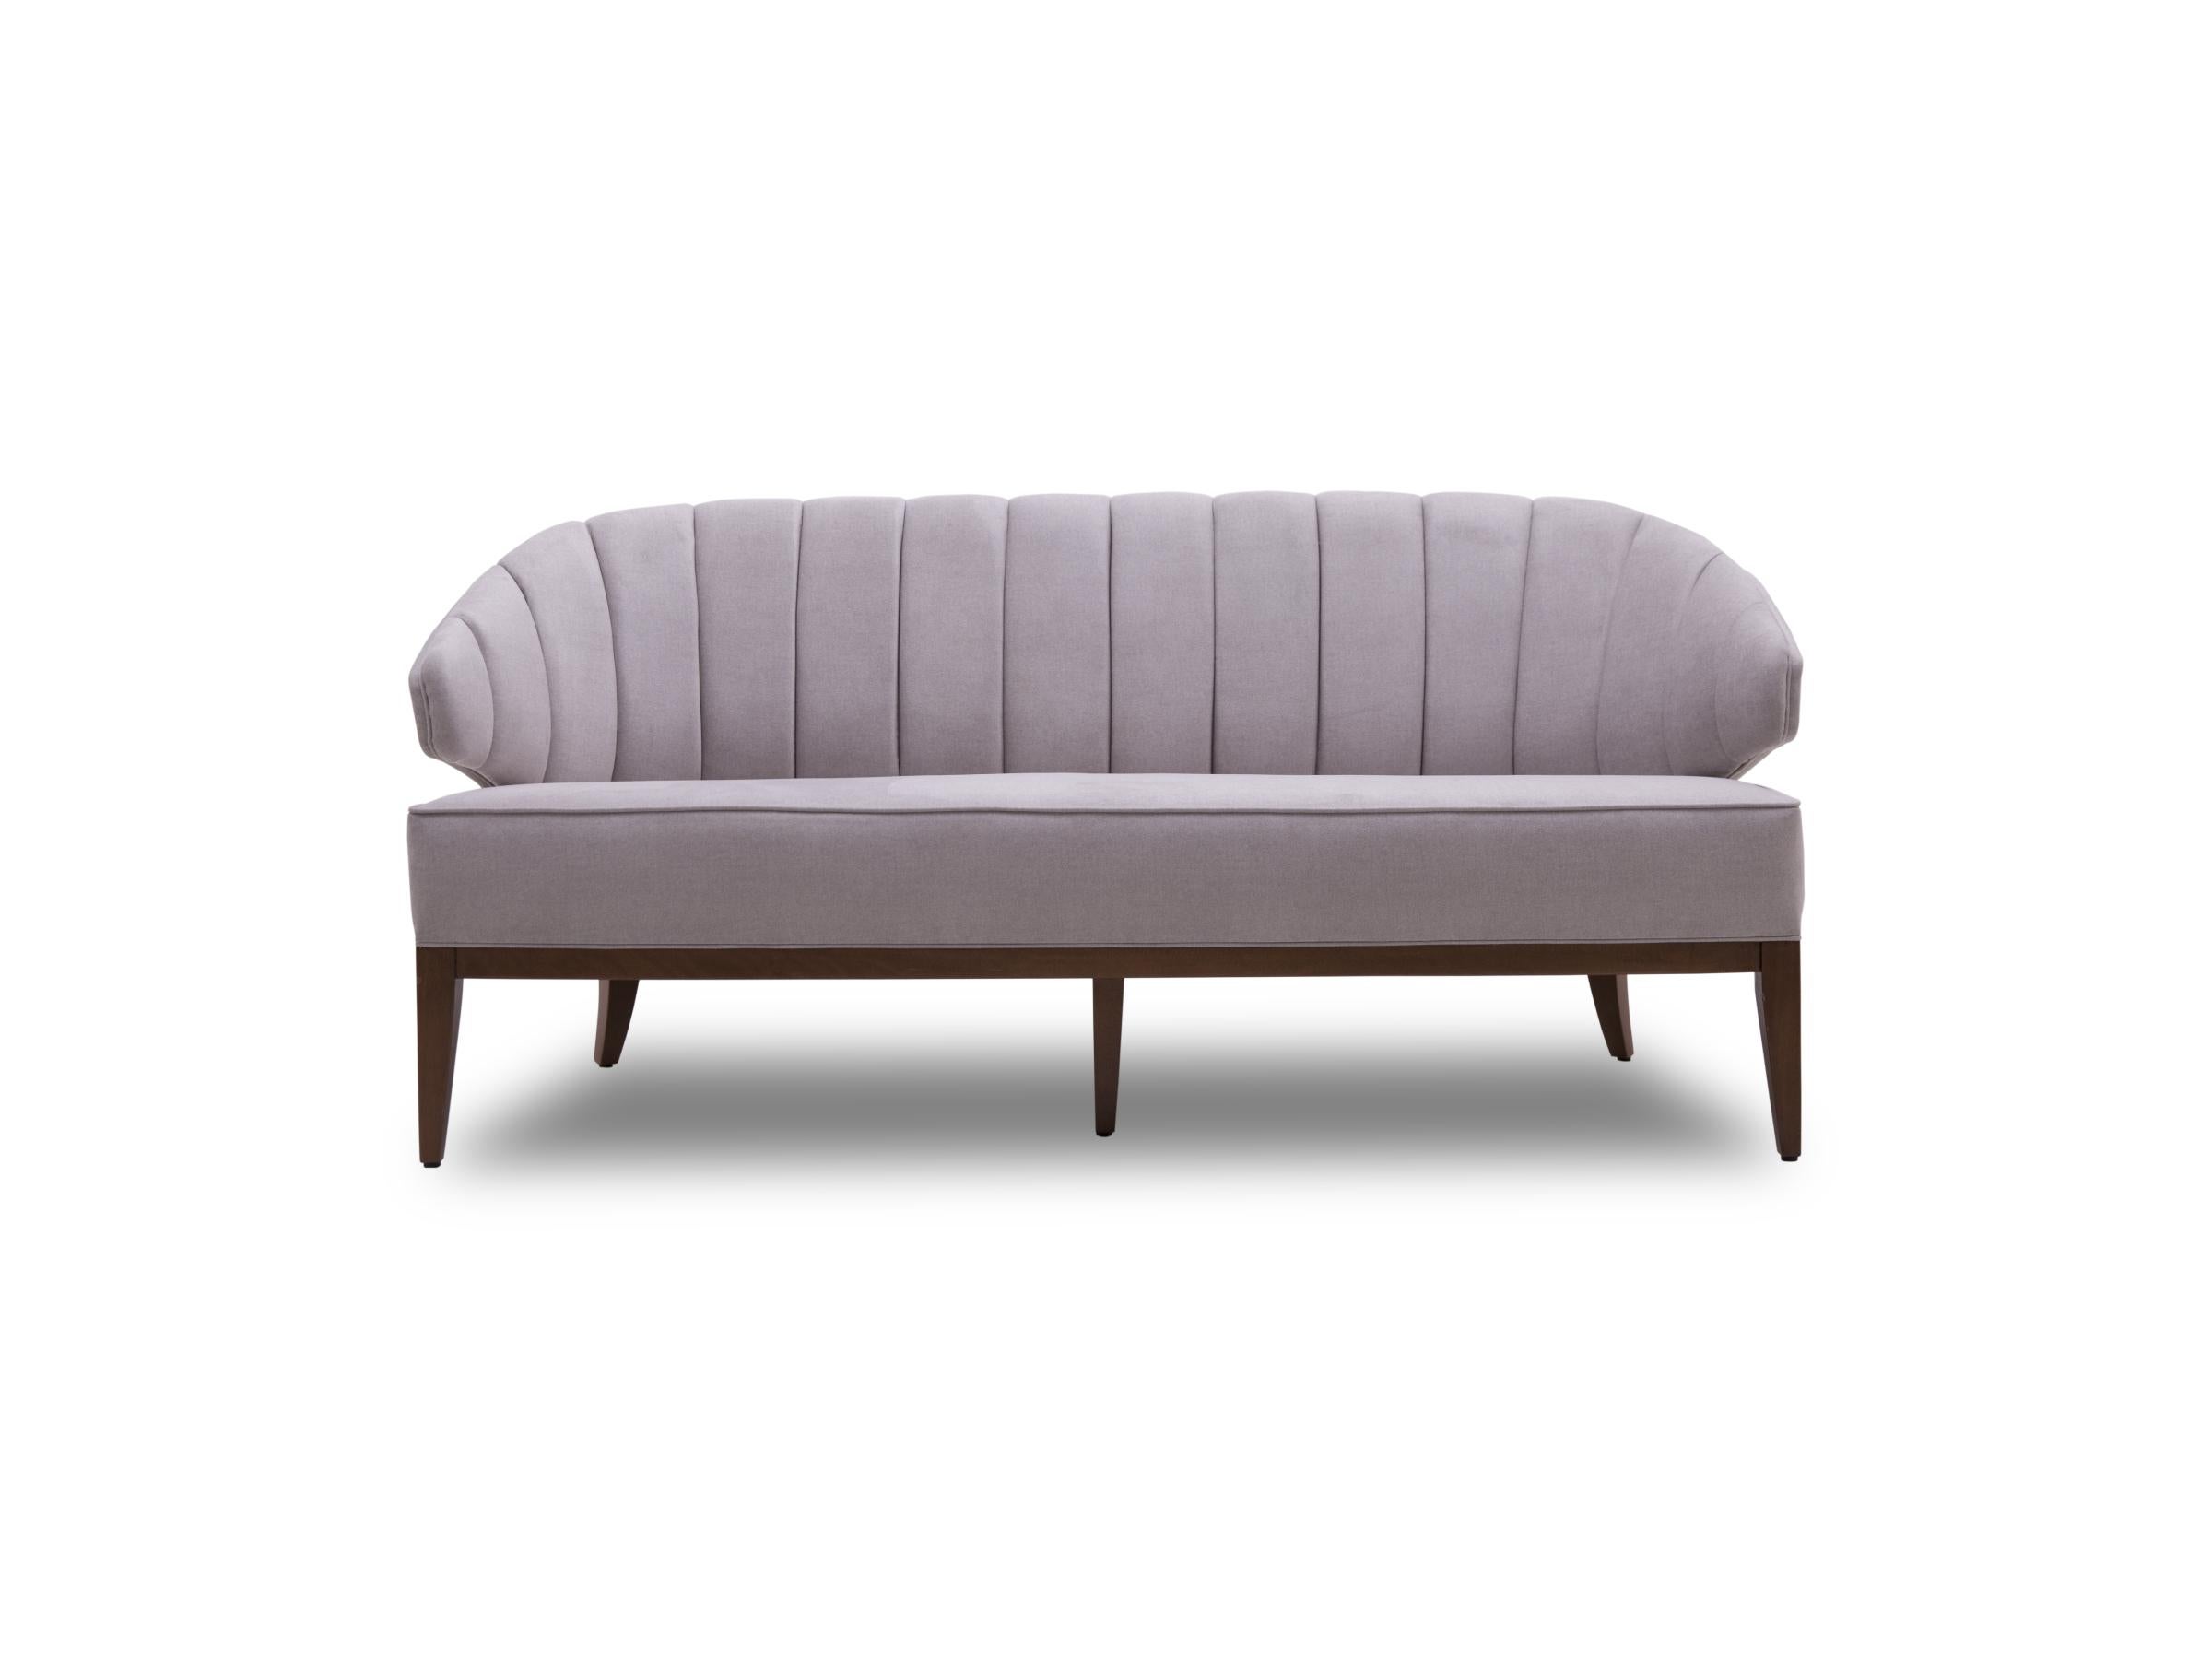 With its ideal depth and width, the three-seater Twice Bench will be a perfect solution for narrow spaces! The modernized traditional look of it will create harmony with both contemporary and classic pieces. The sliced back offers extra comfort